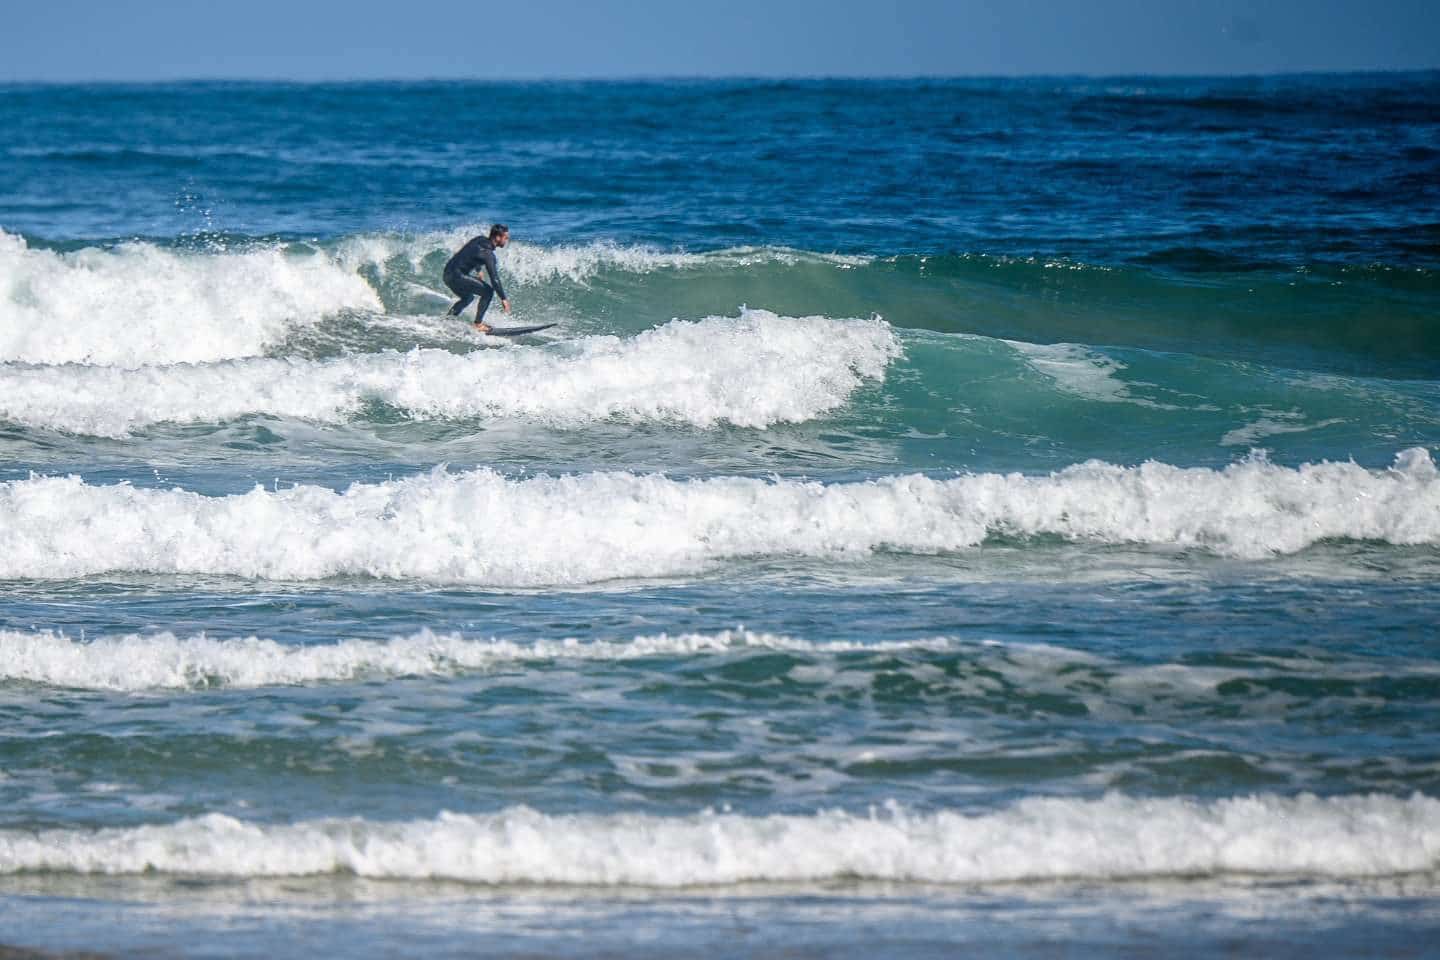 A surfer on the waves in Portugal